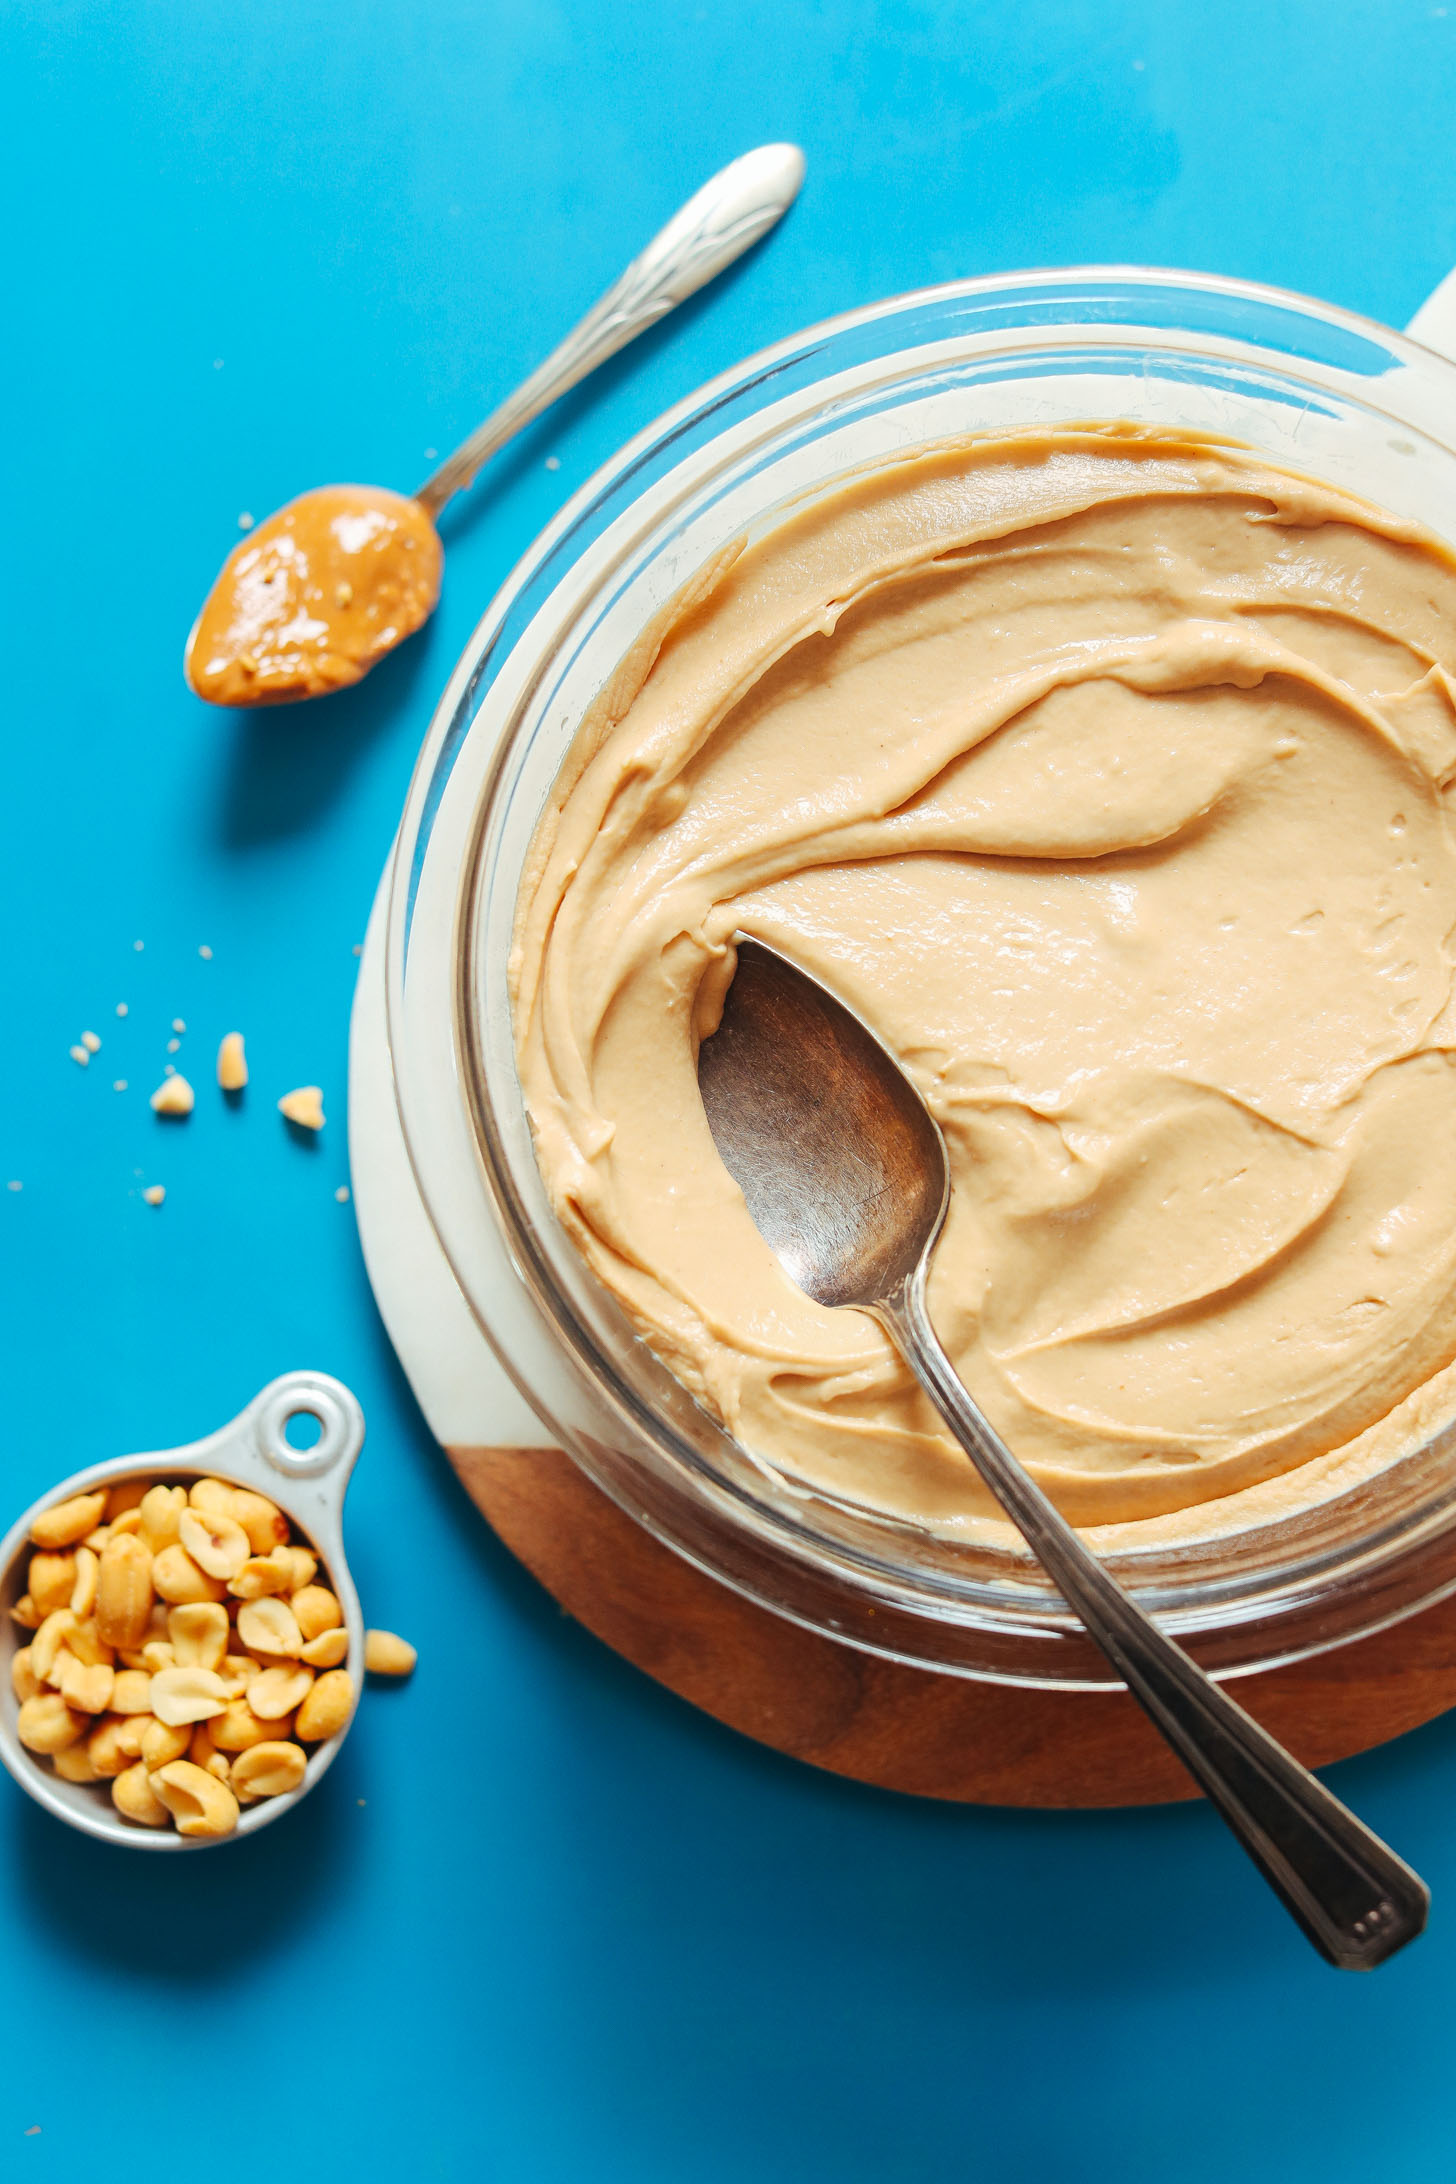 Grabbing a spoonful of our Vegan Peanut Butter Pudding recipe